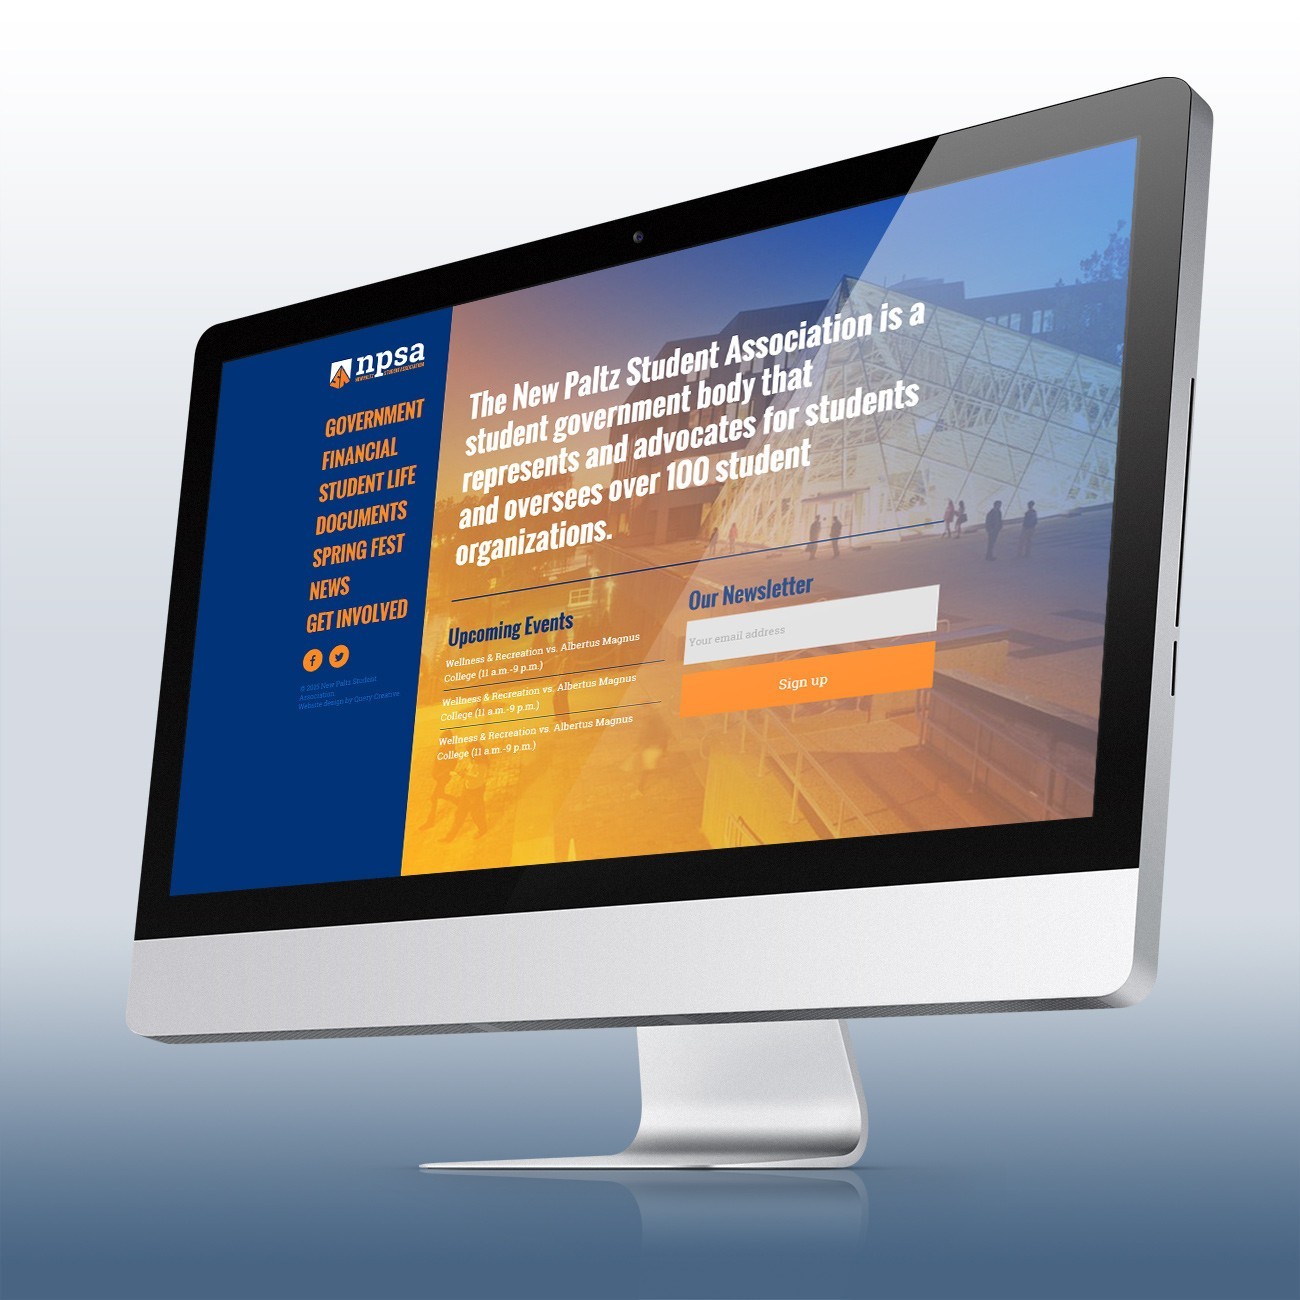 New Paltz Student Association Website, designed by Query Creative in the Hudson Valley